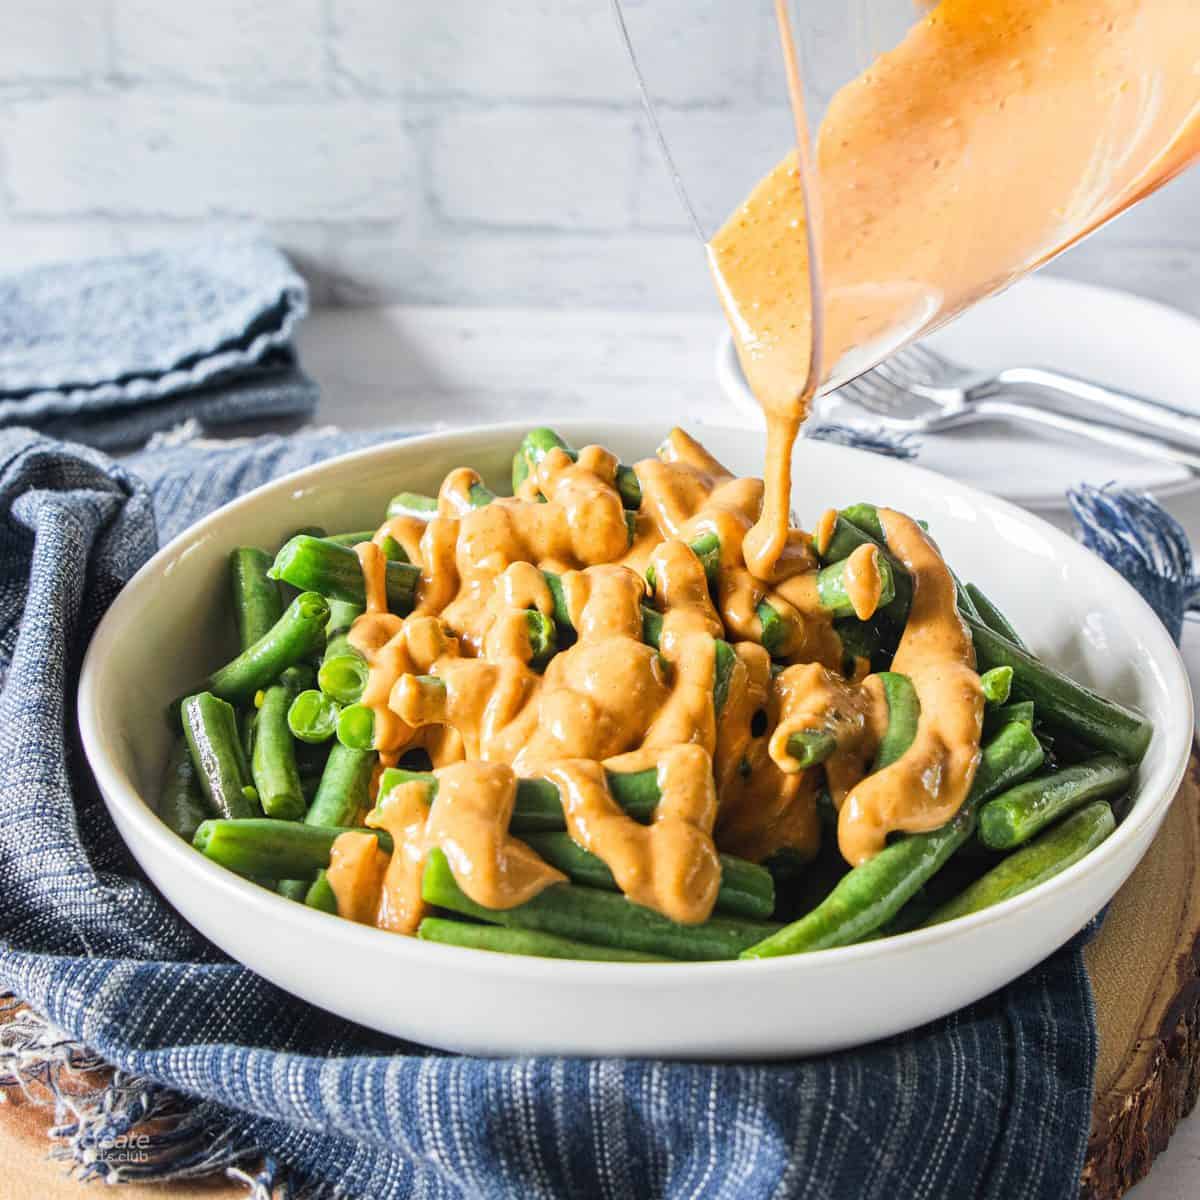 peanut sauce drizzled over green beans